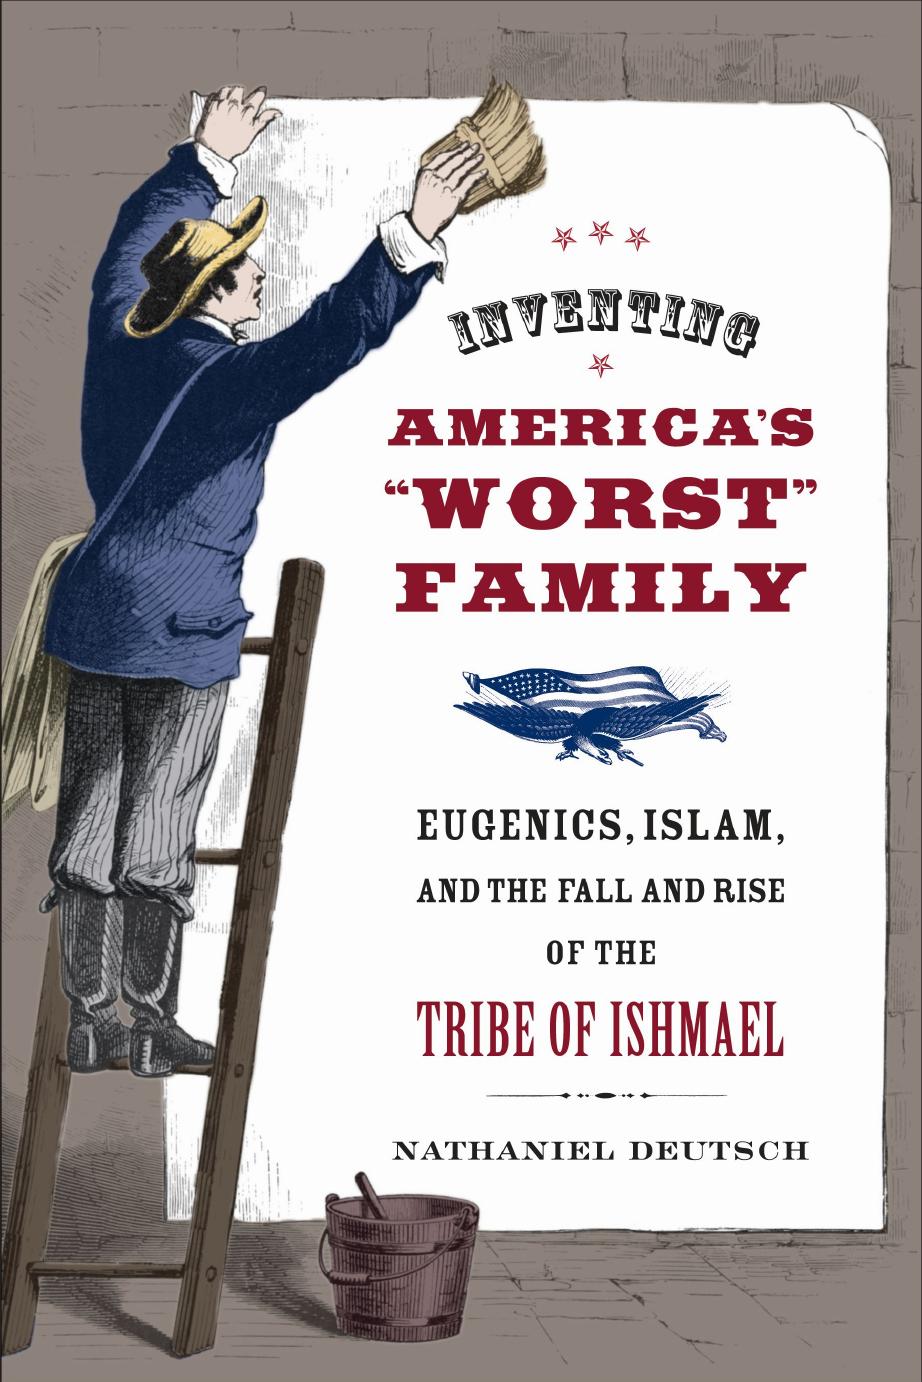 Inventing America's Worst Family: Eugenics, Islam, and the Fall and Rise of the Tribe of Ishmael by Nathaniel Deutsch